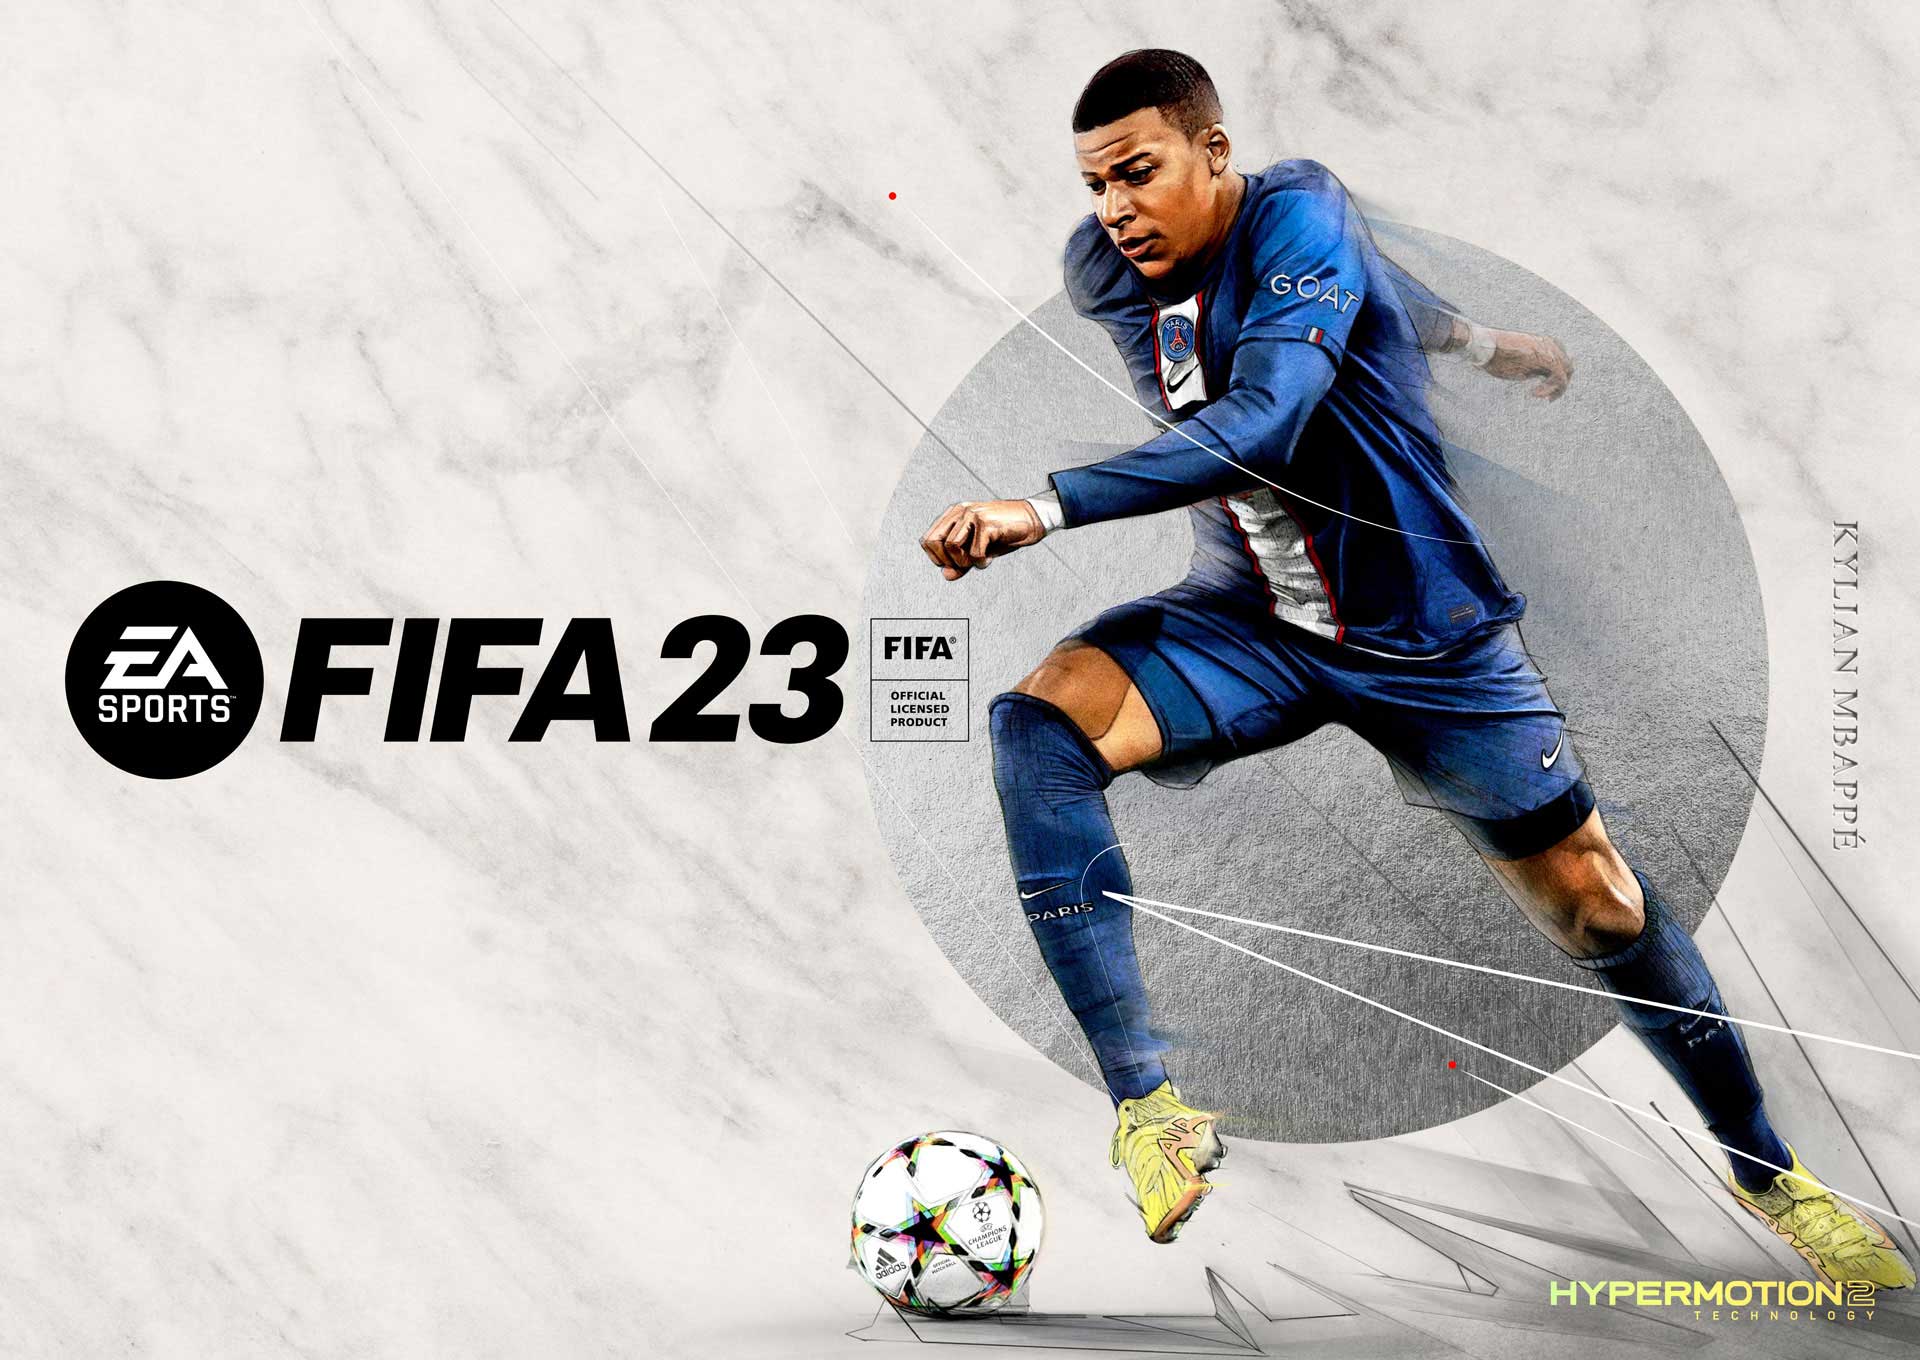 FIFA 23, Game Pro Central, gameprocentral.com